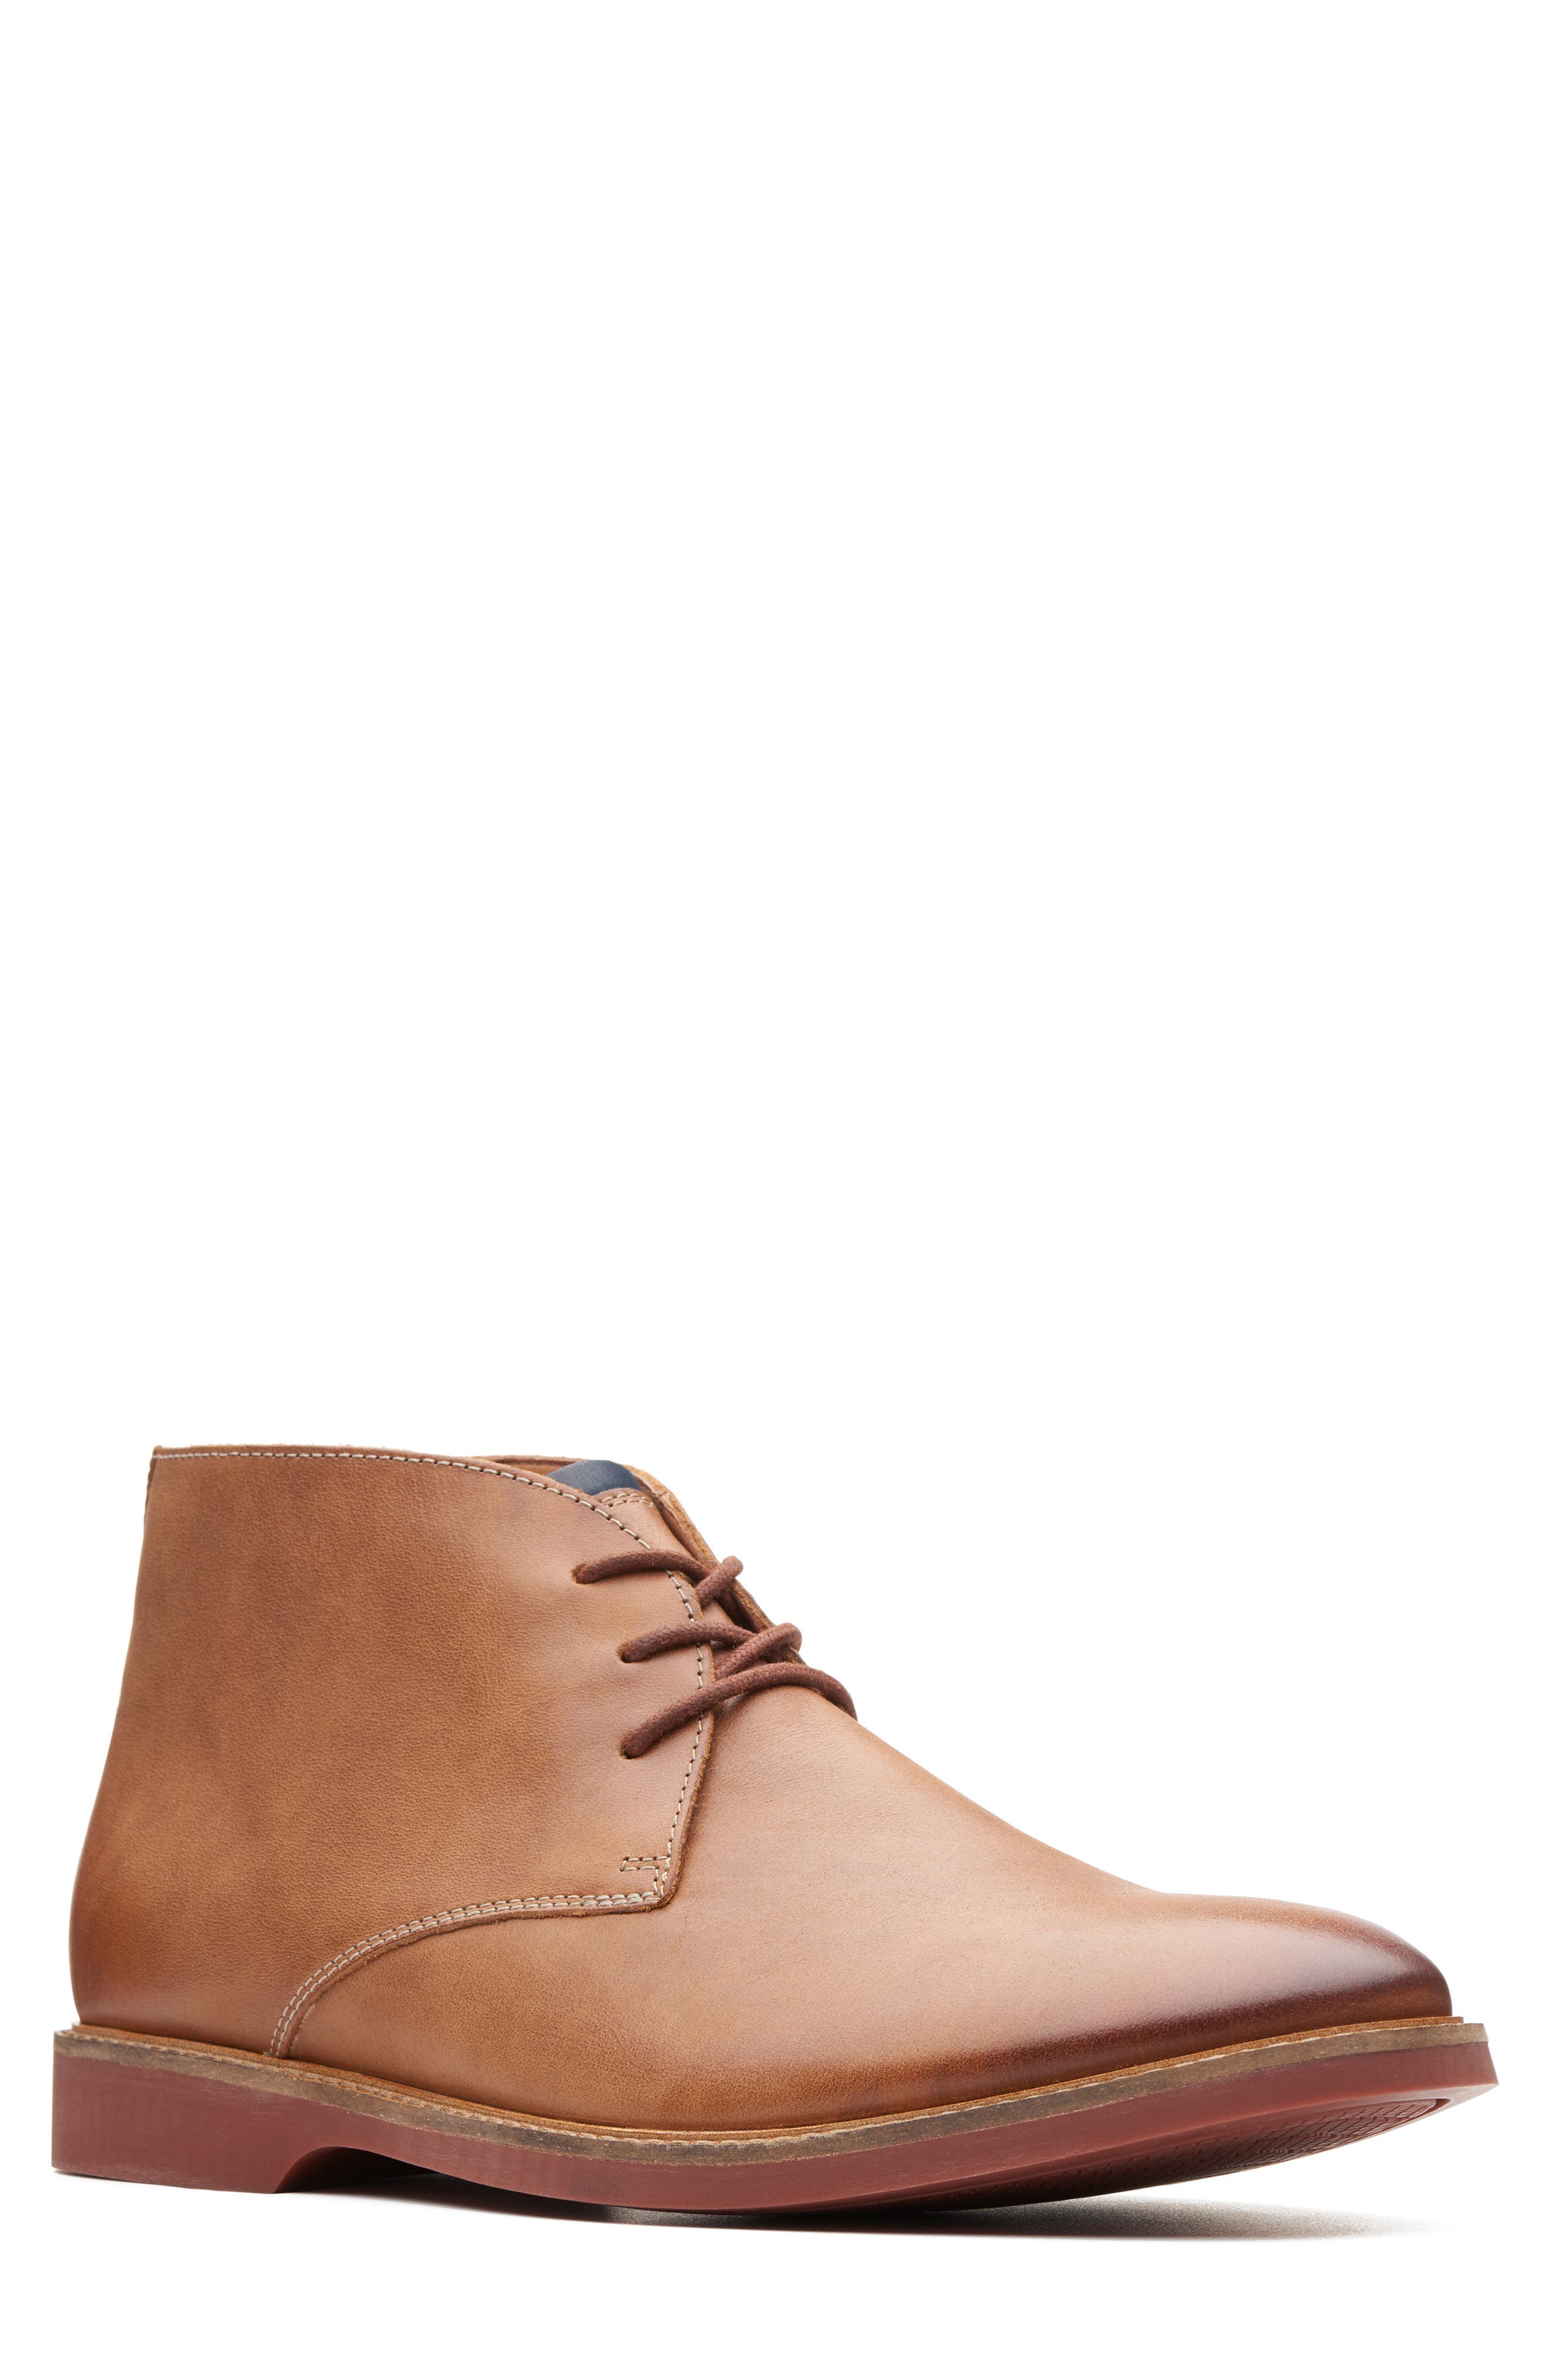 mens clarks shoes clearance